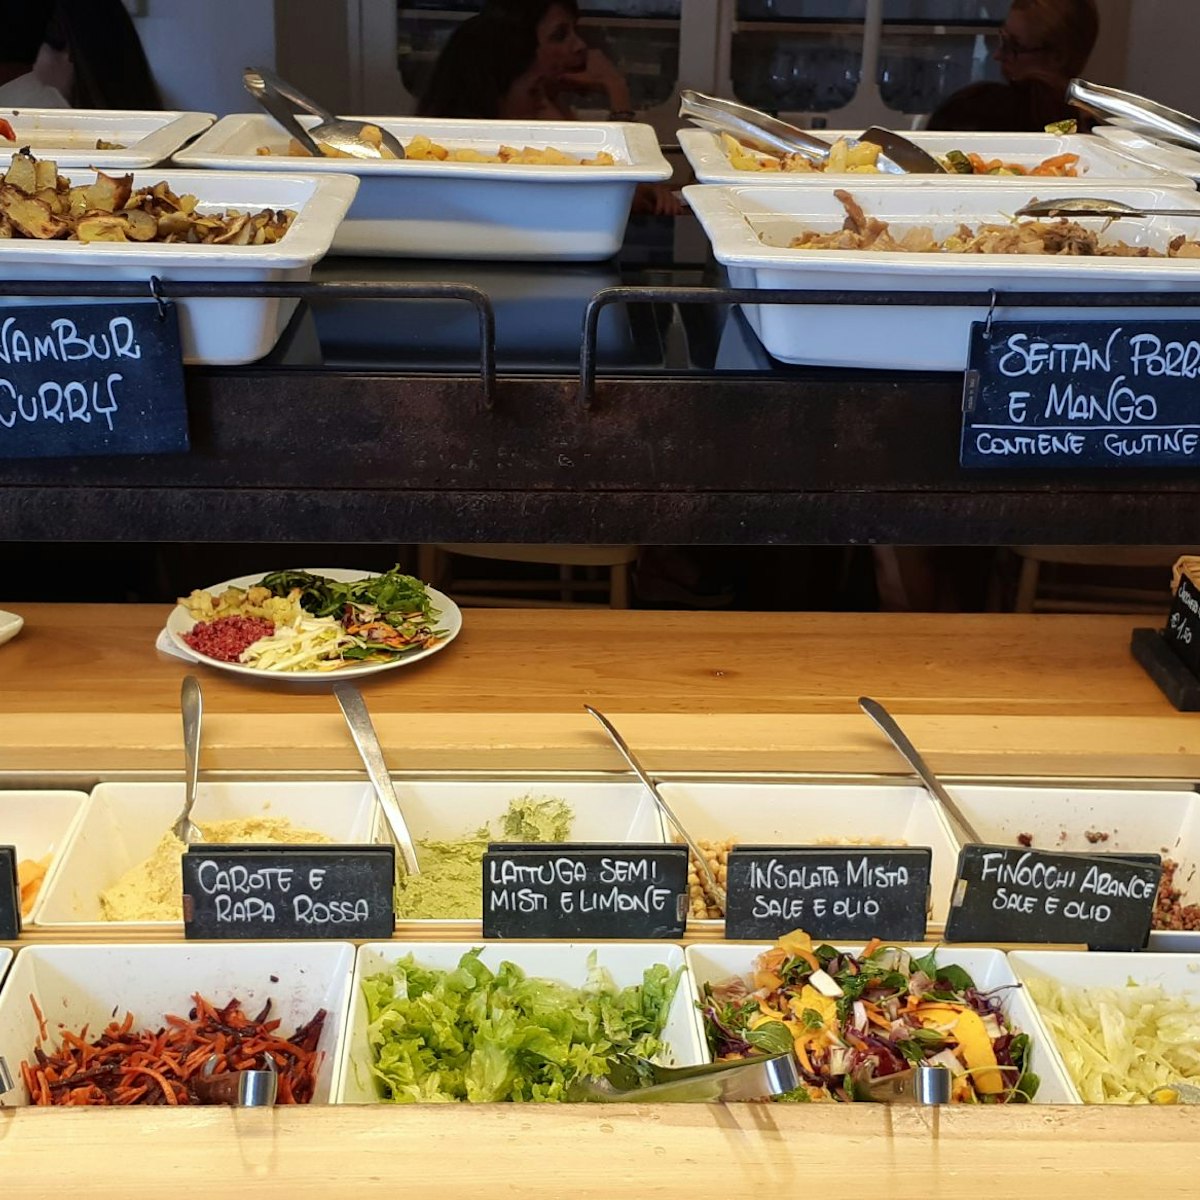 A sampling of the buffet at veggie and organic bistrot 100% in the Testaccio neighborhood.